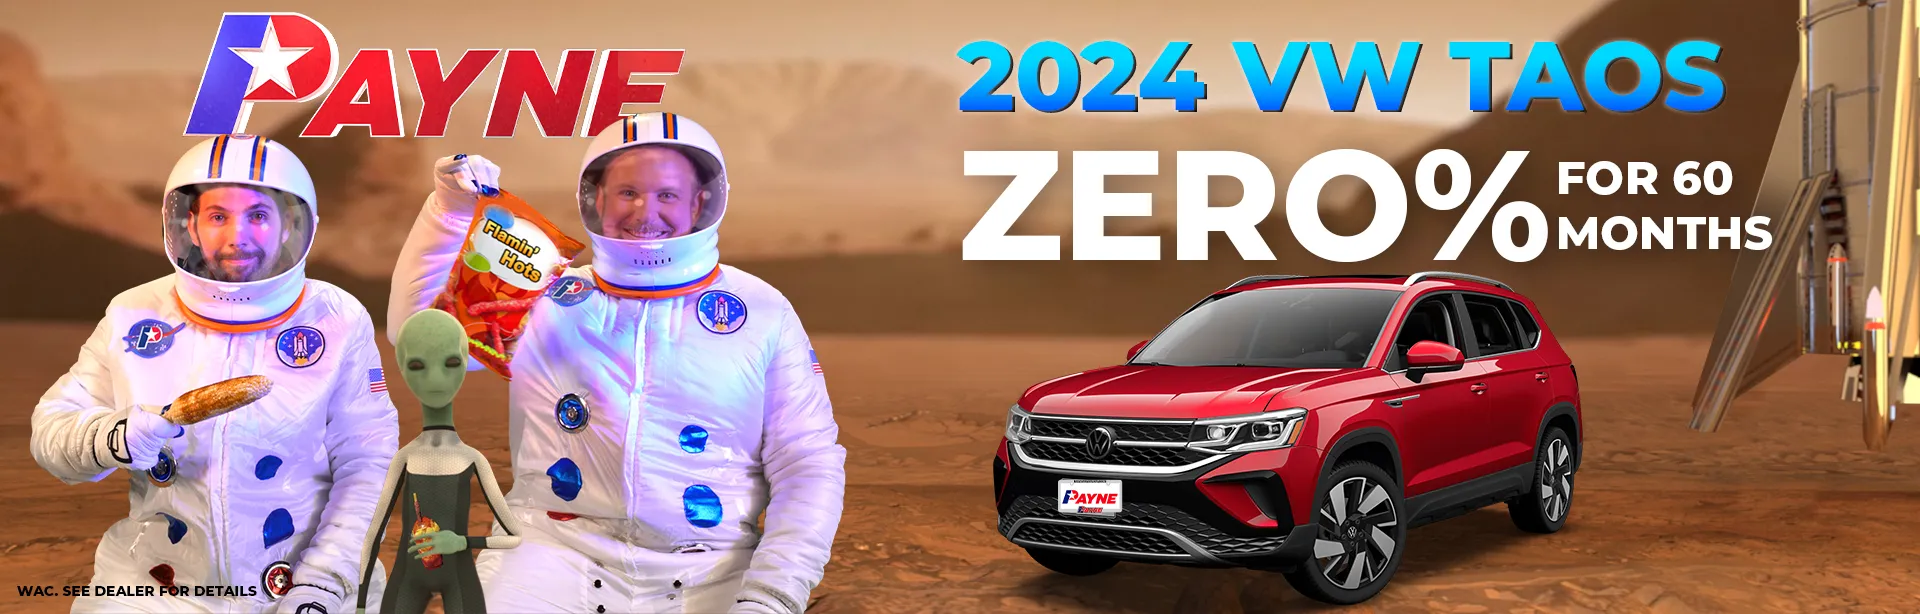 Get ZERO% for 60 Months on a 2024 VW Taos